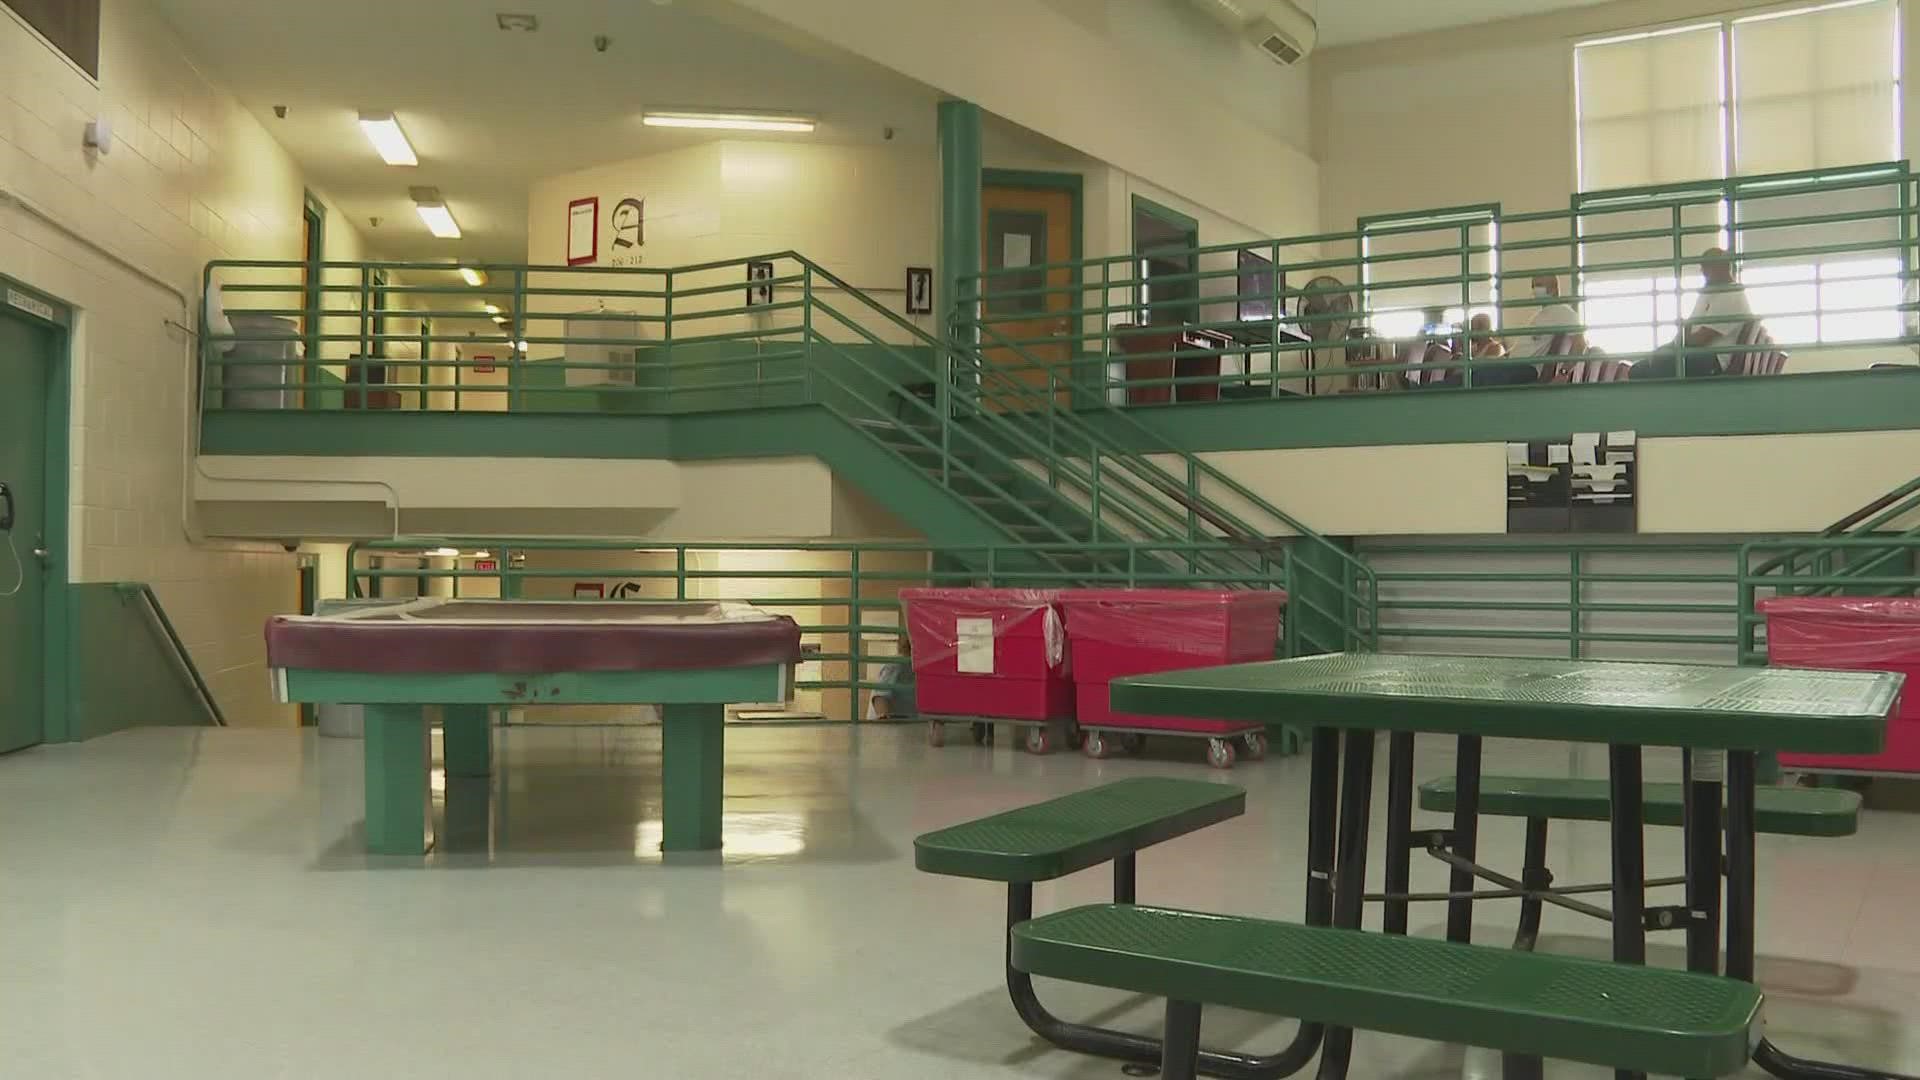 The Maine Department of Corrections is working to normalize what being in prison means and better prepare residents for if and when they are released.